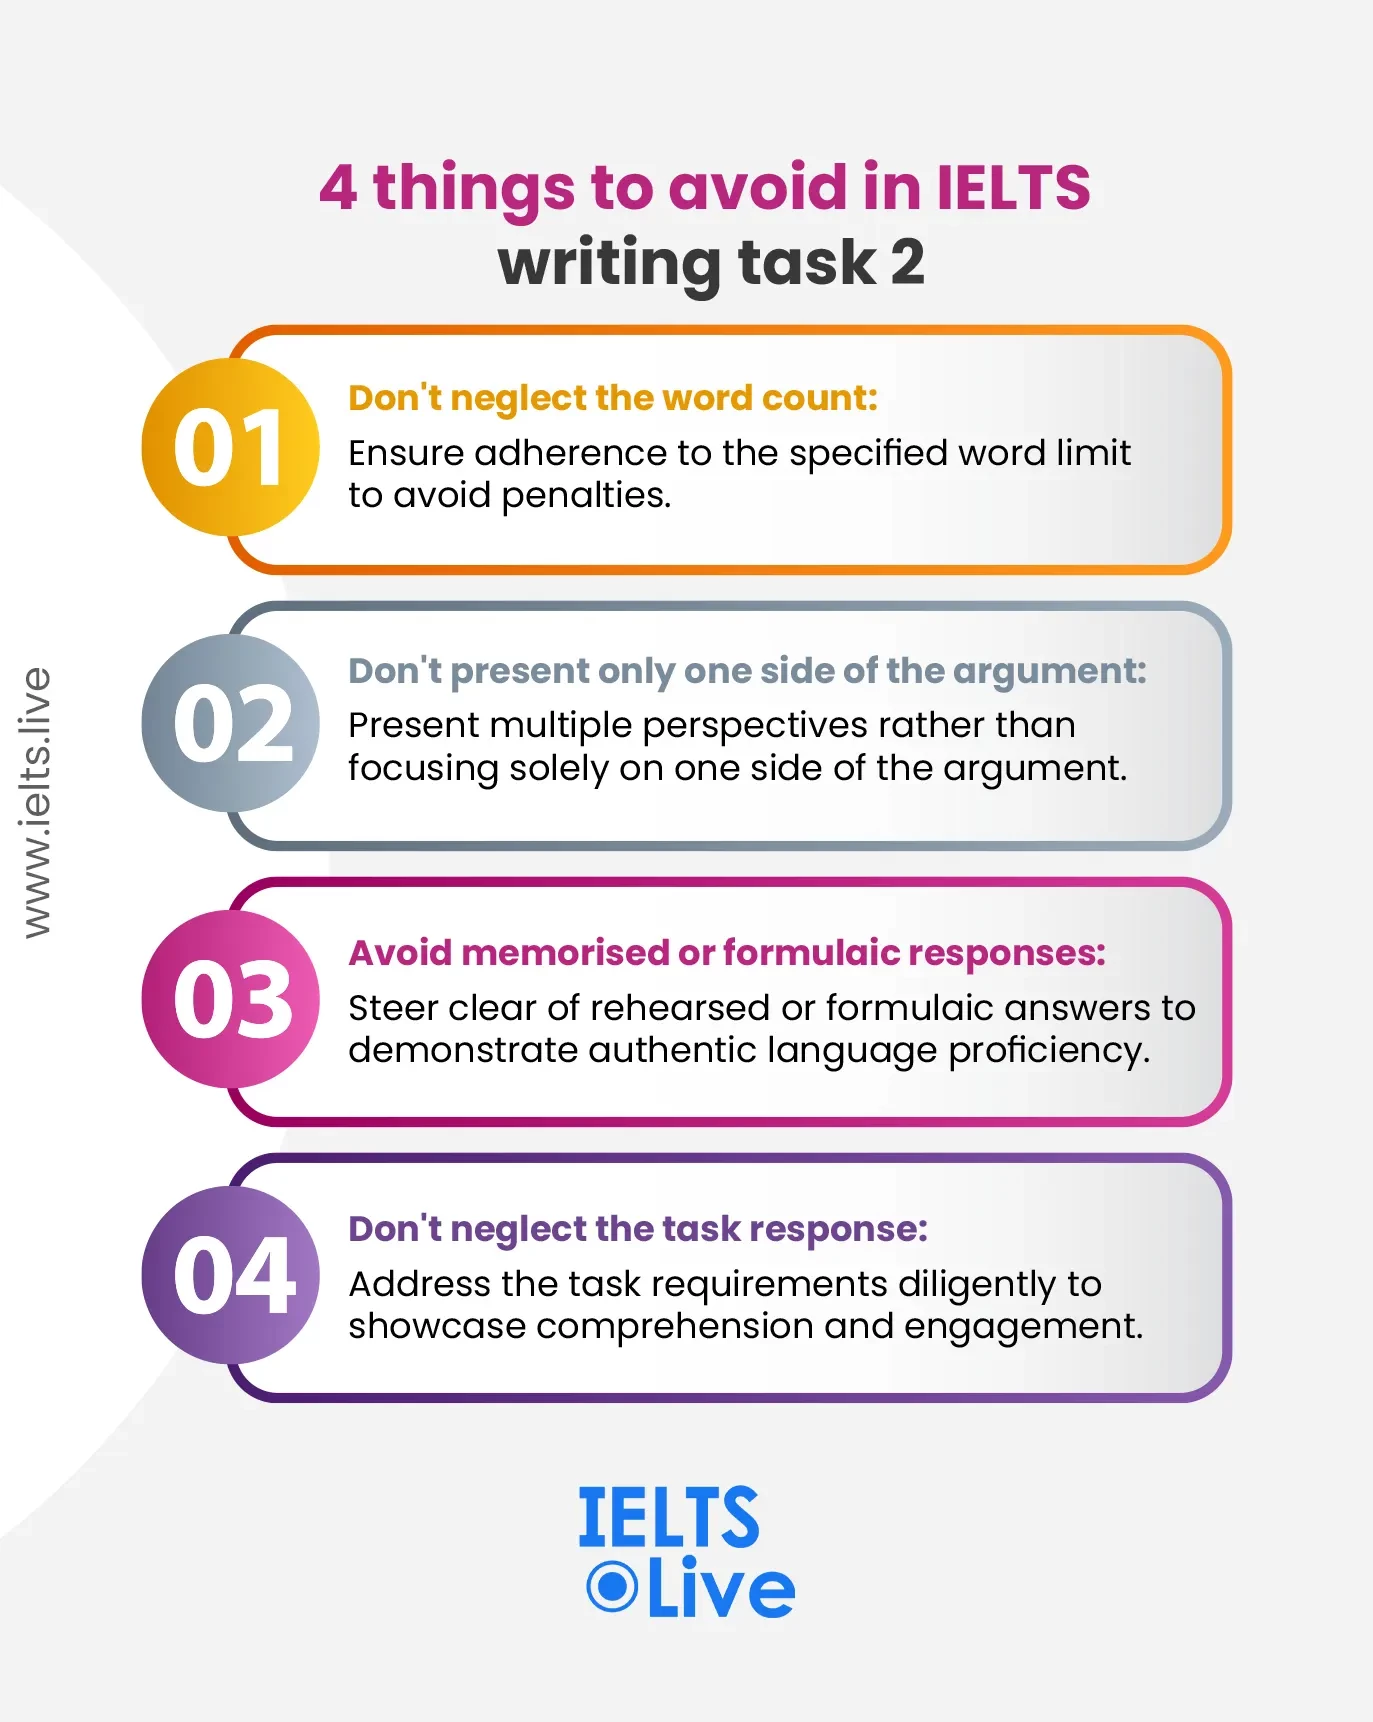 4 things to avoid in IELTS writing task 2